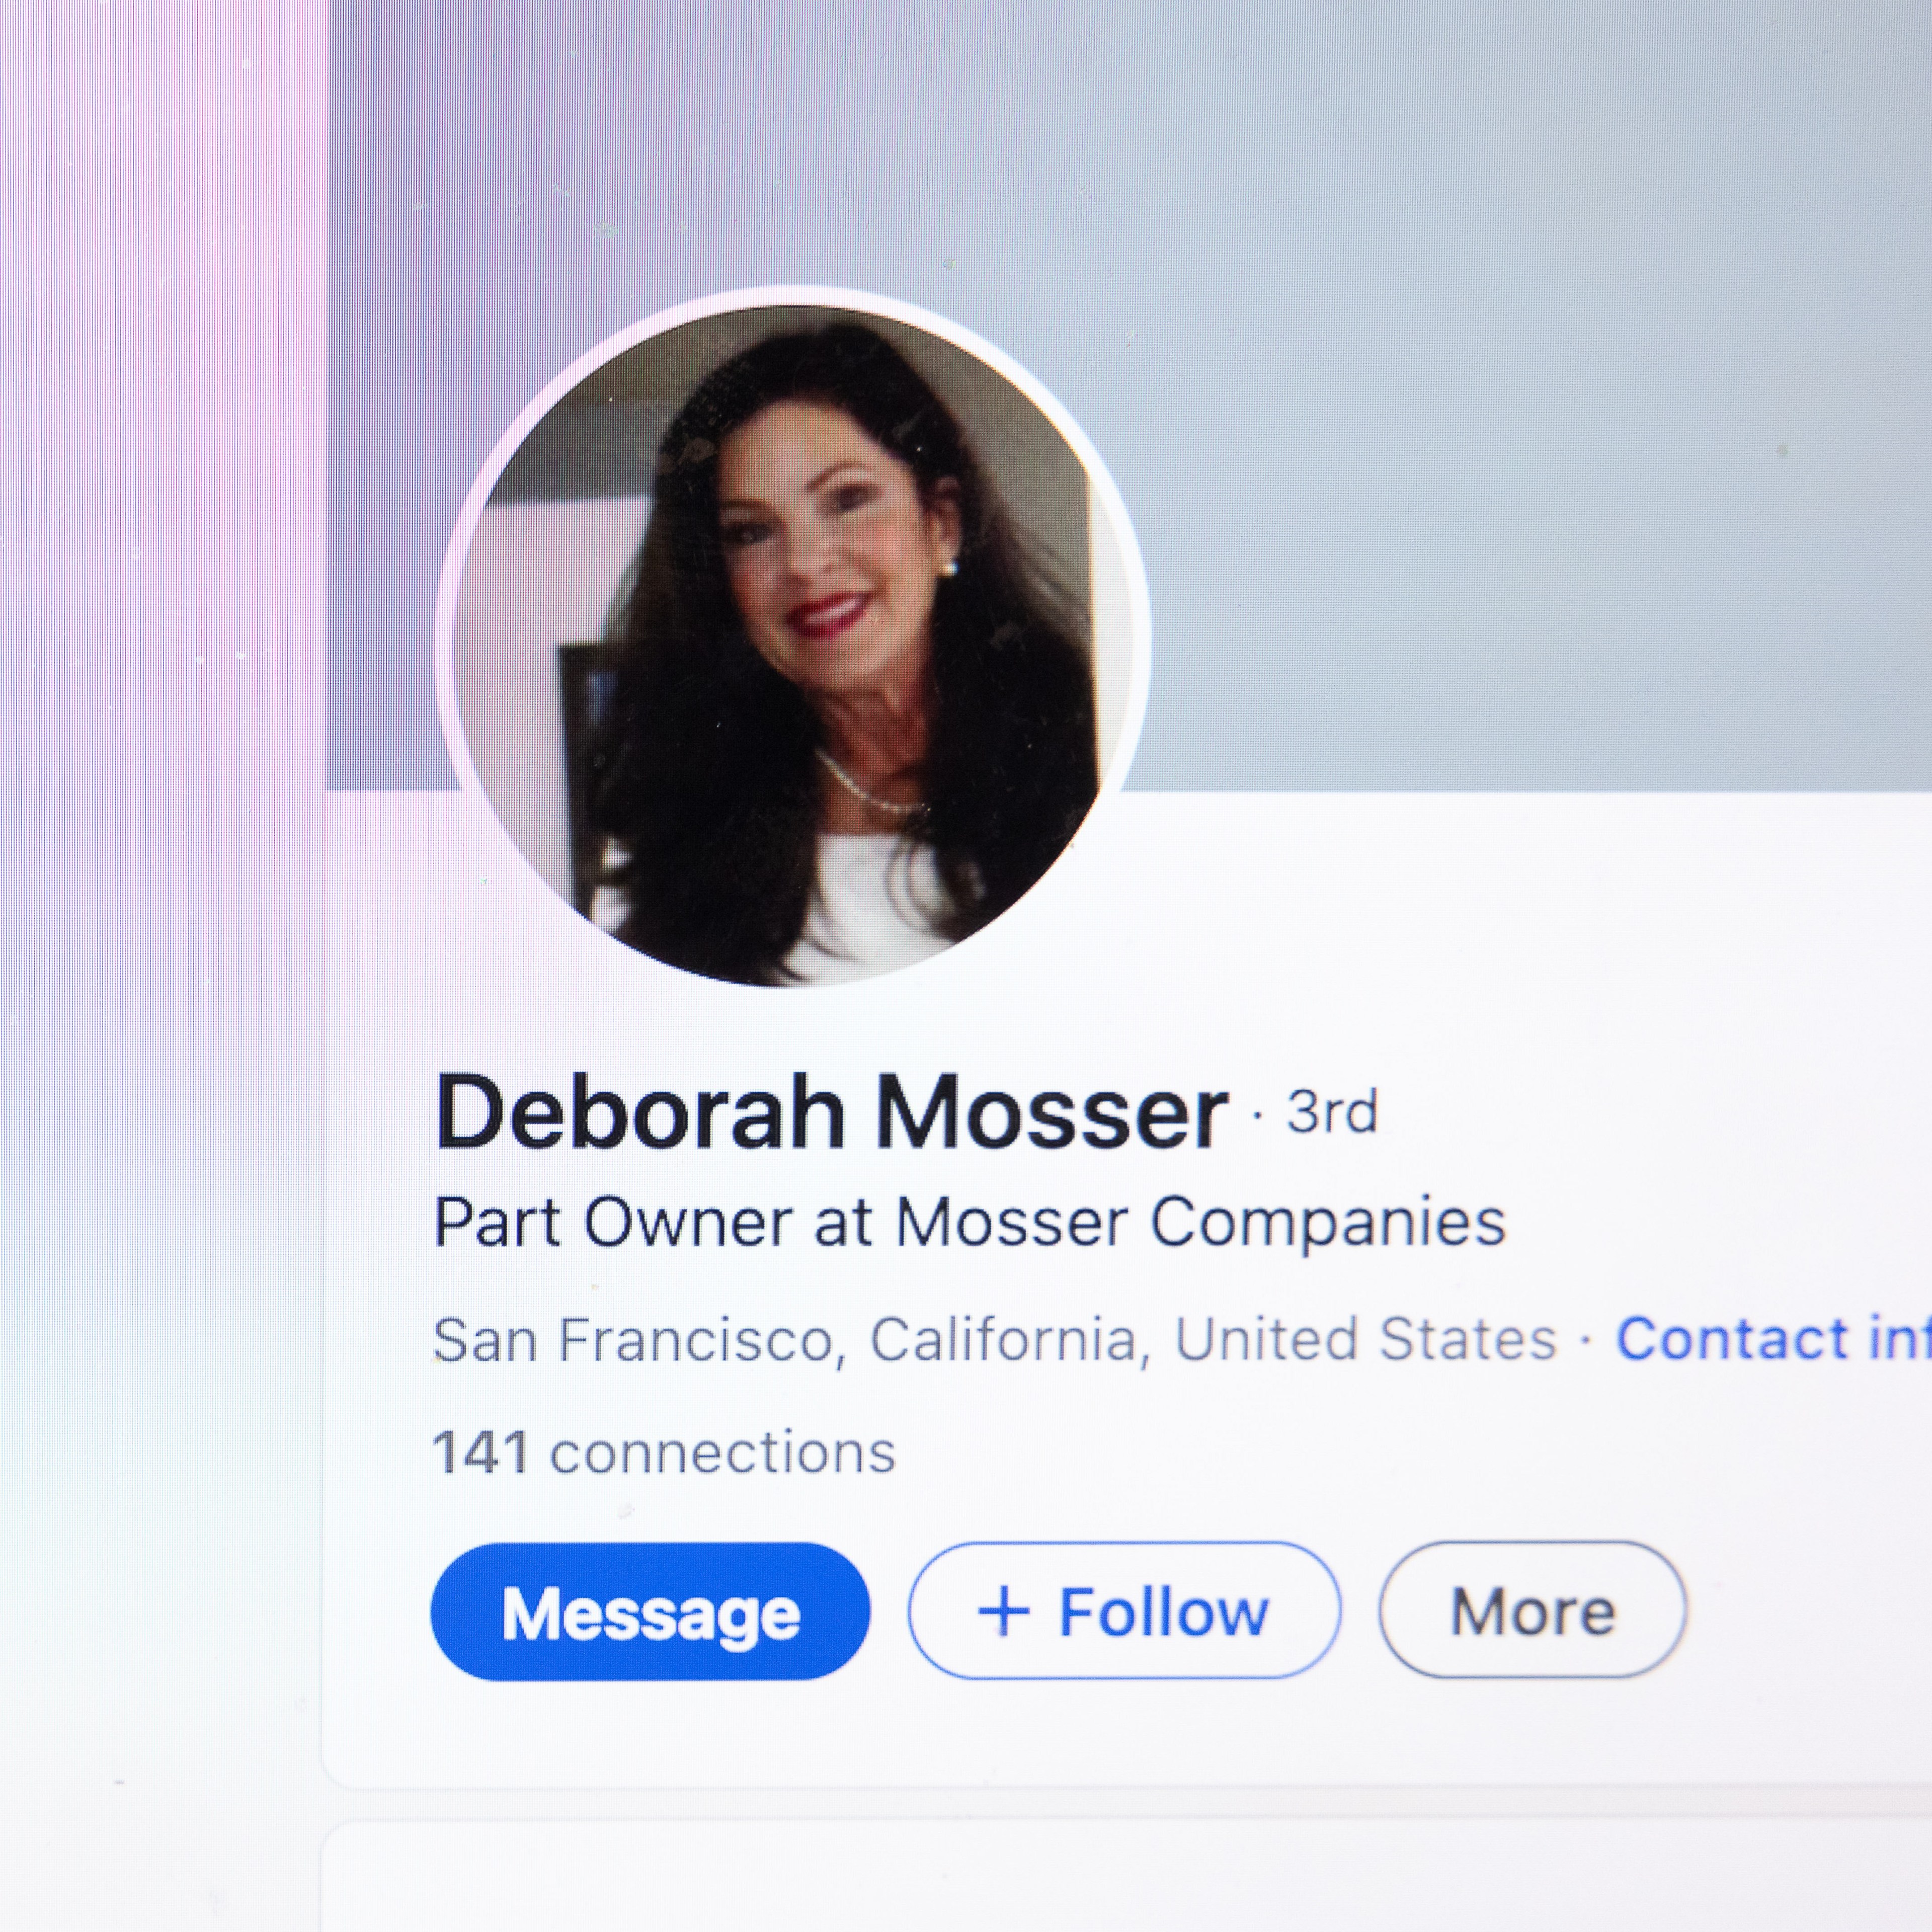 This image is a LinkedIn profile for Deborah Mosser, a part owner at Mosser Companies in San Francisco, showing her profile picture, connections, and contact options.